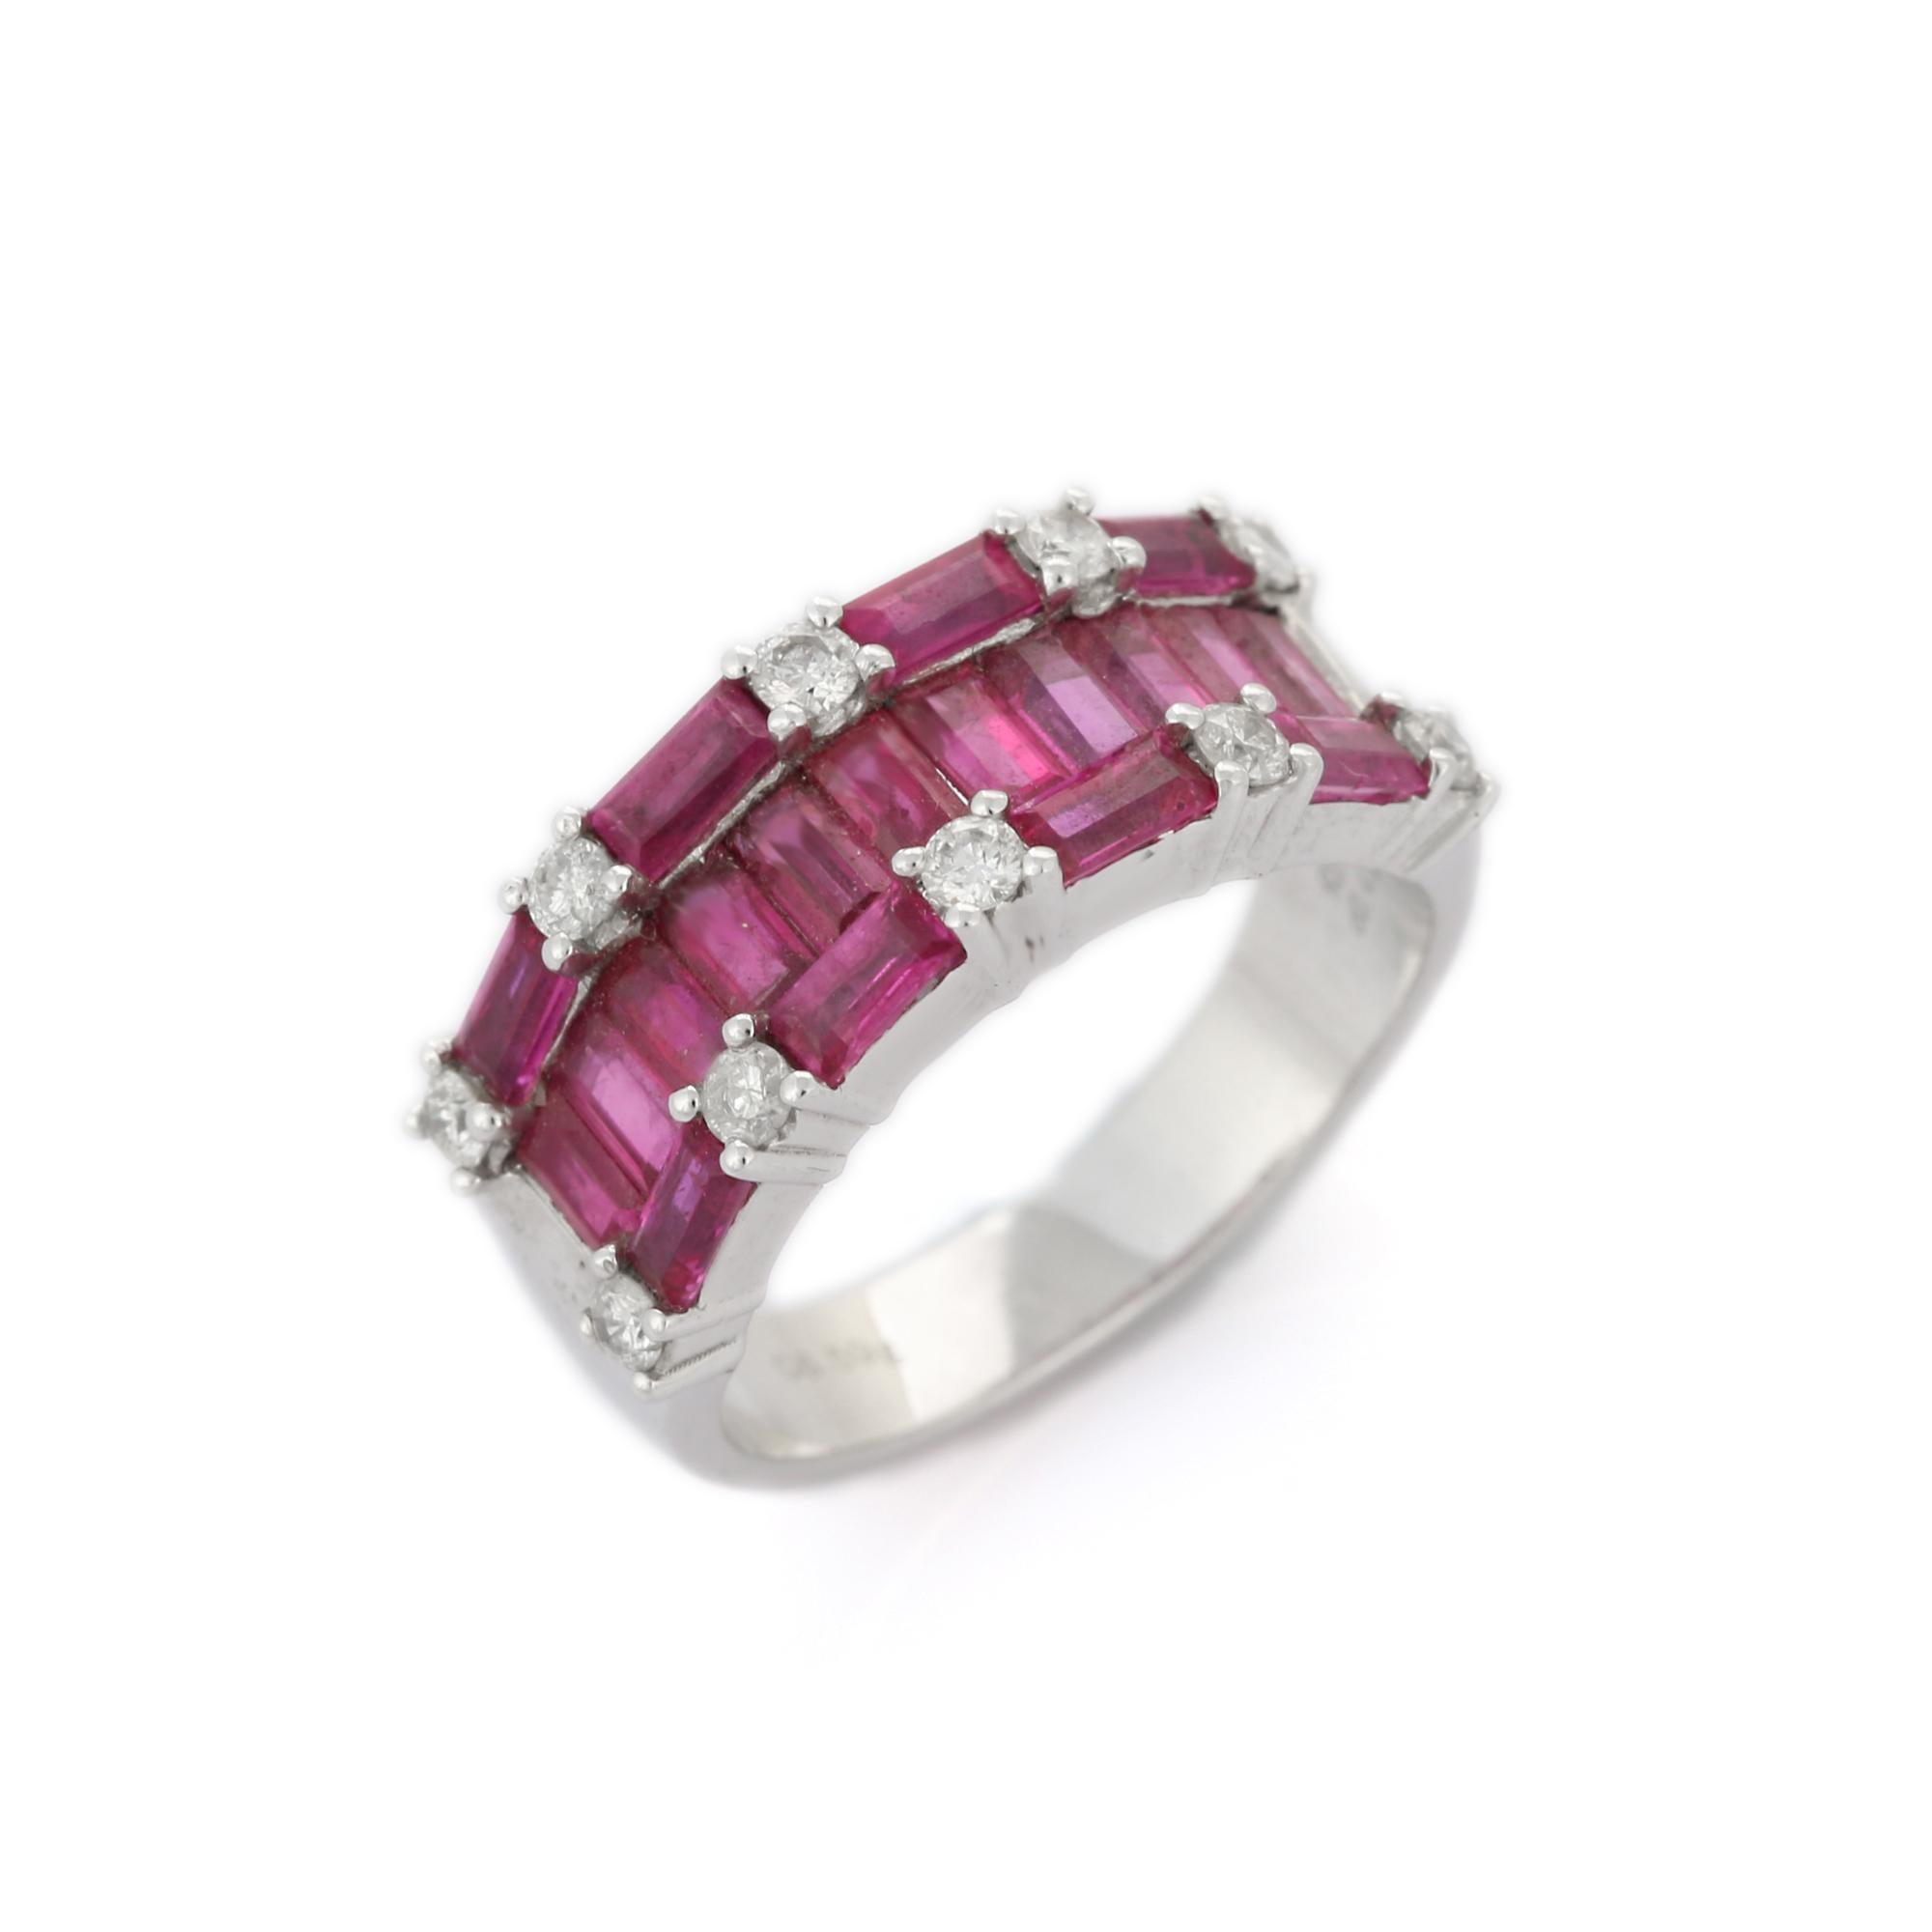 For Sale:  14K White Gold 3.19 Ct Ruby Baguettes Cluster Wedding Band Ring with Diamond 5